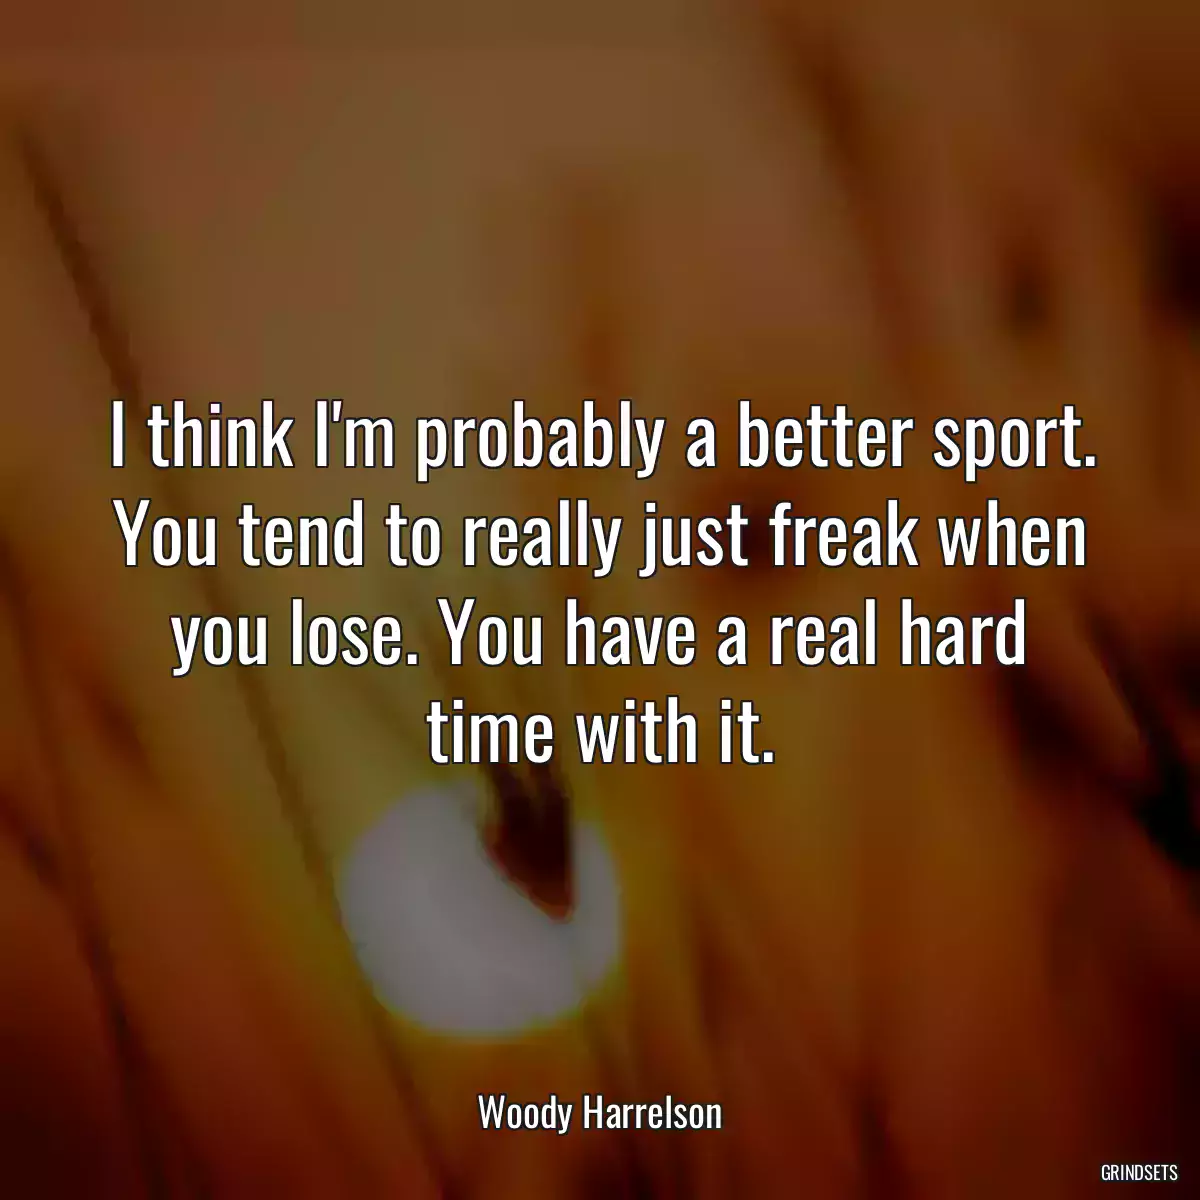 I think I\'m probably a better sport. You tend to really just freak when you lose. You have a real hard time with it.